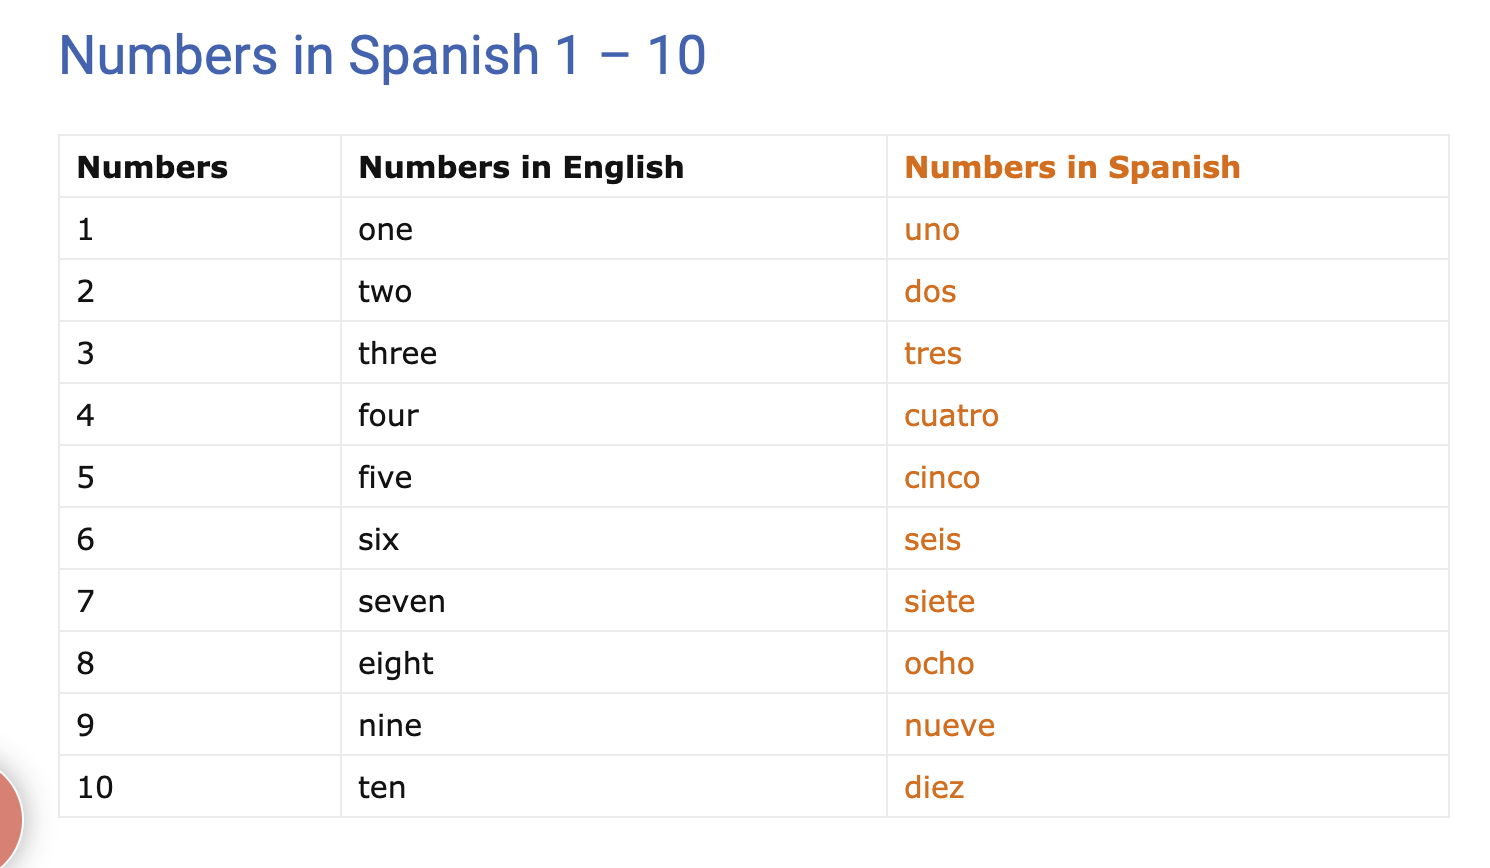 how to say 250 in spanish